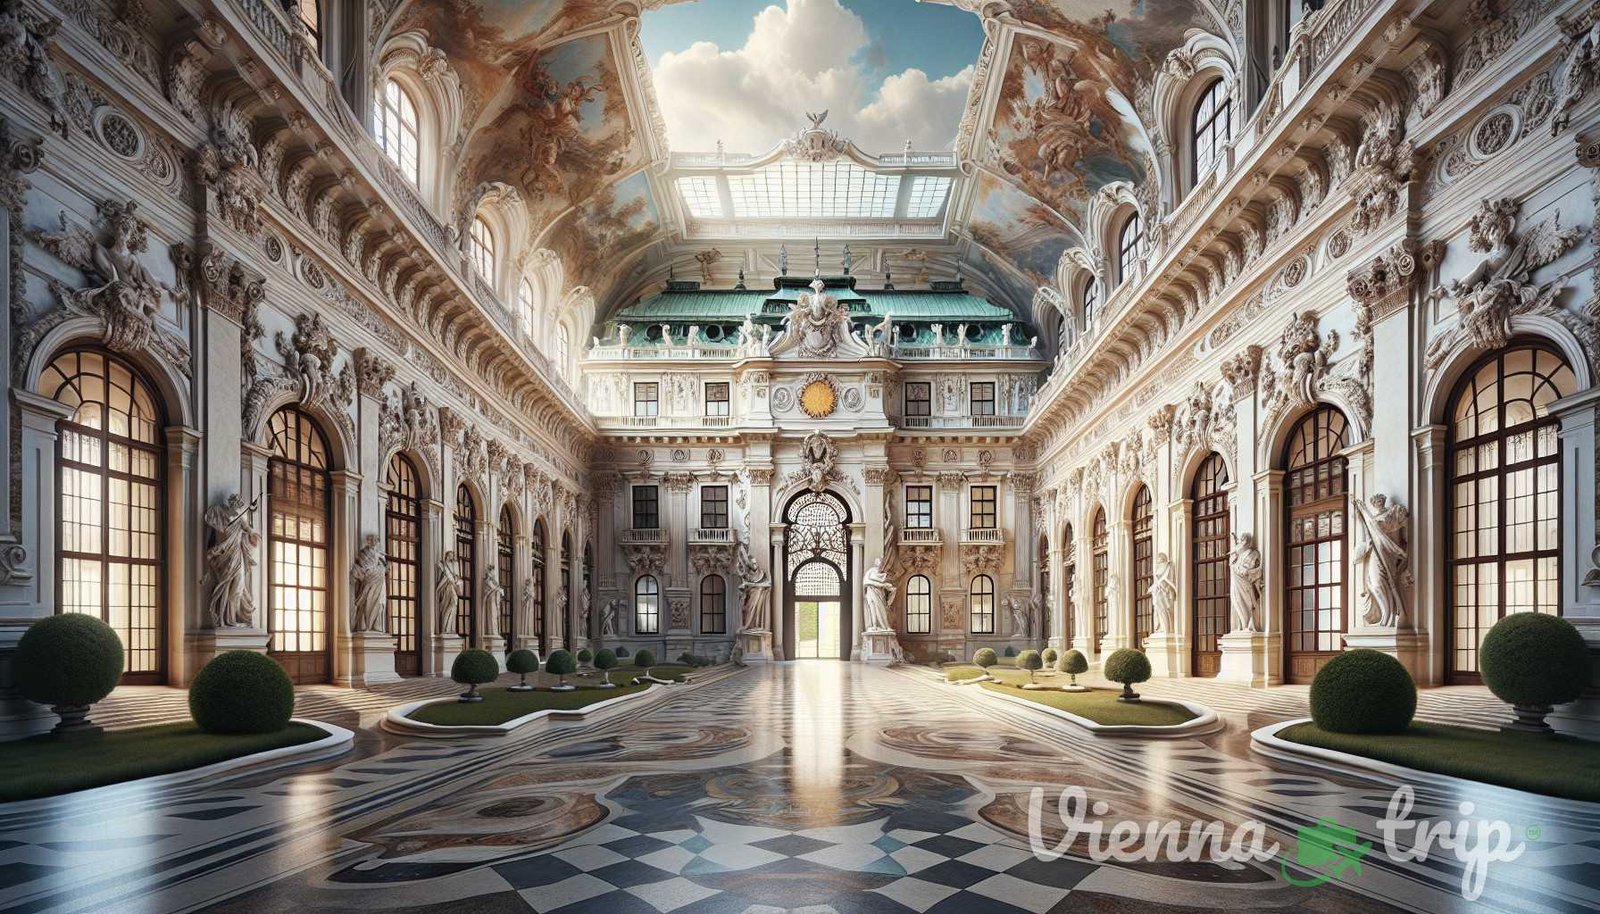 Illustration for section: The Hidden Gems of Belvedere Palace Our exploration of Viennese imperial splendor takes us to Belved - viennese secrets